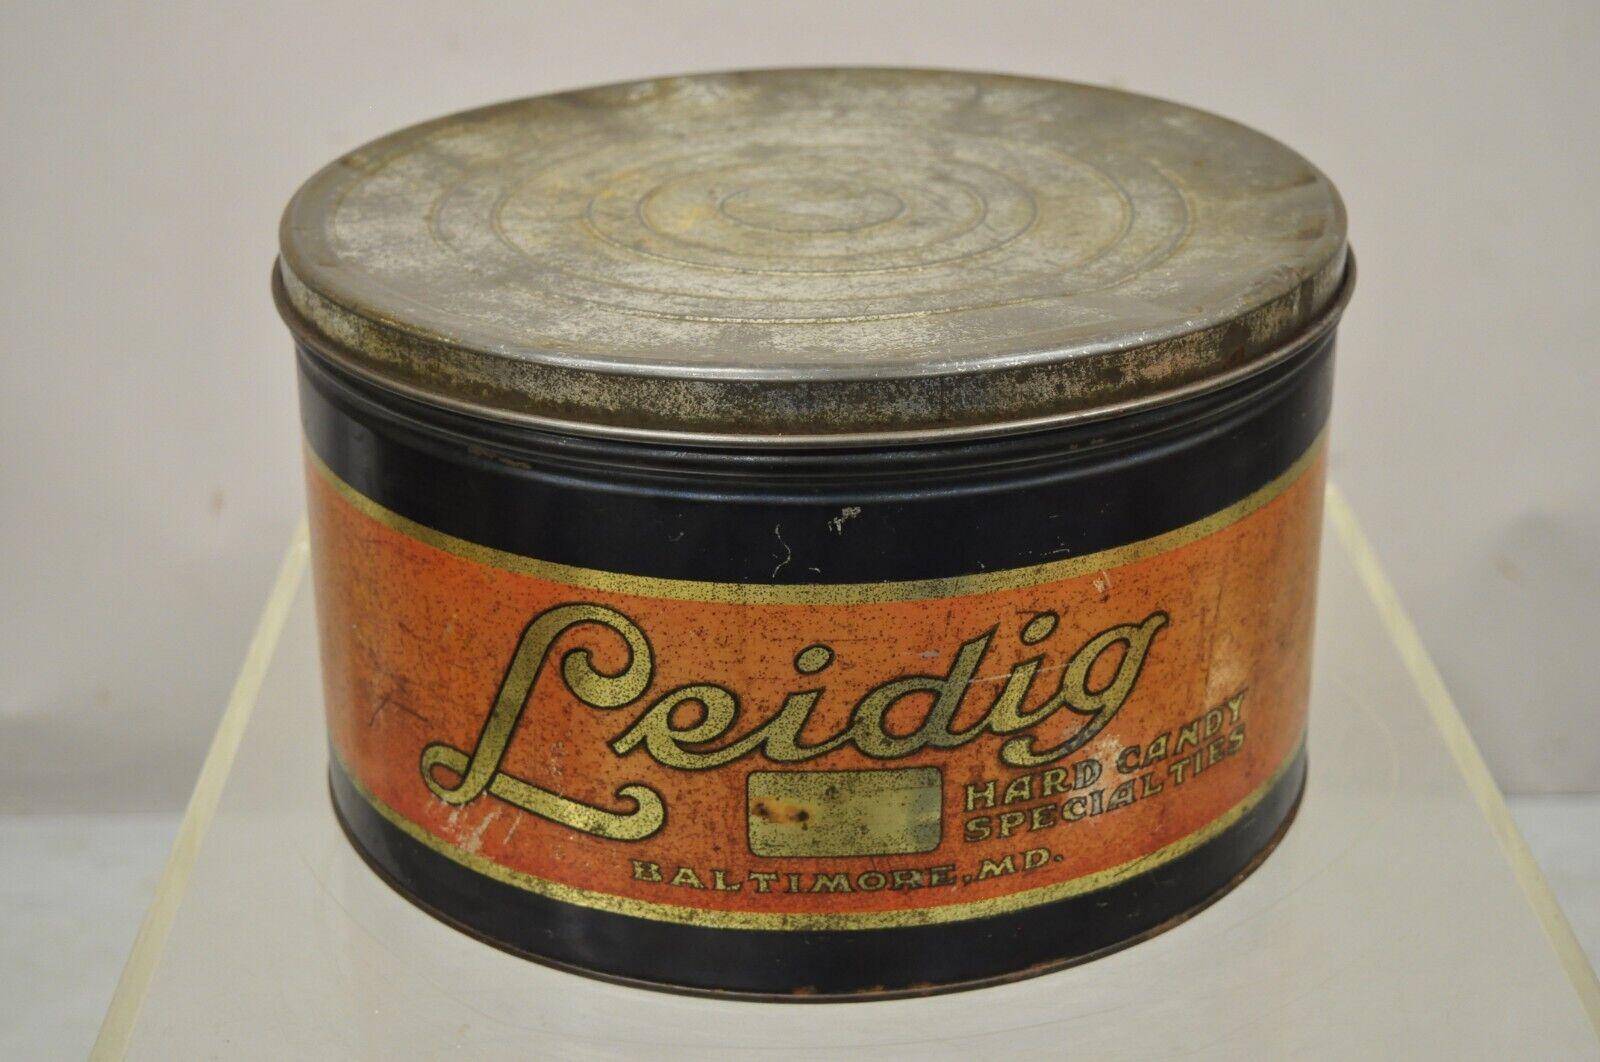 Antique Ledig hard candy tin metal round lidded advertising can. Circa early 20th century. Measurements: 7